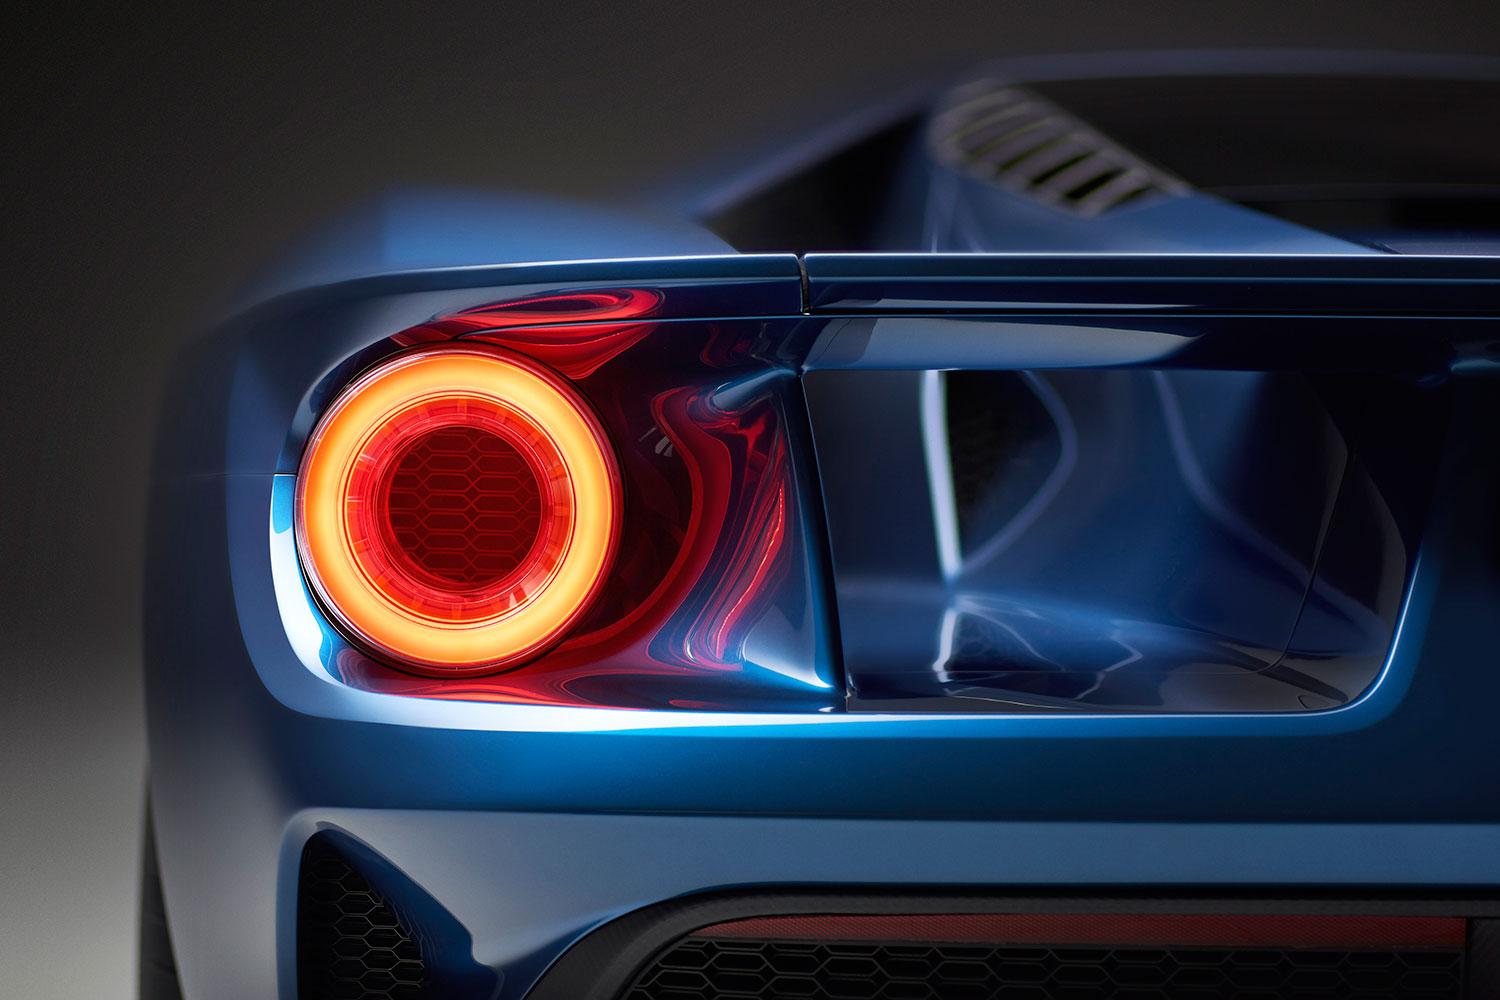 meet the man who sculpted softer side of fords hardcore 2016 gt all newfordgt 13 hr